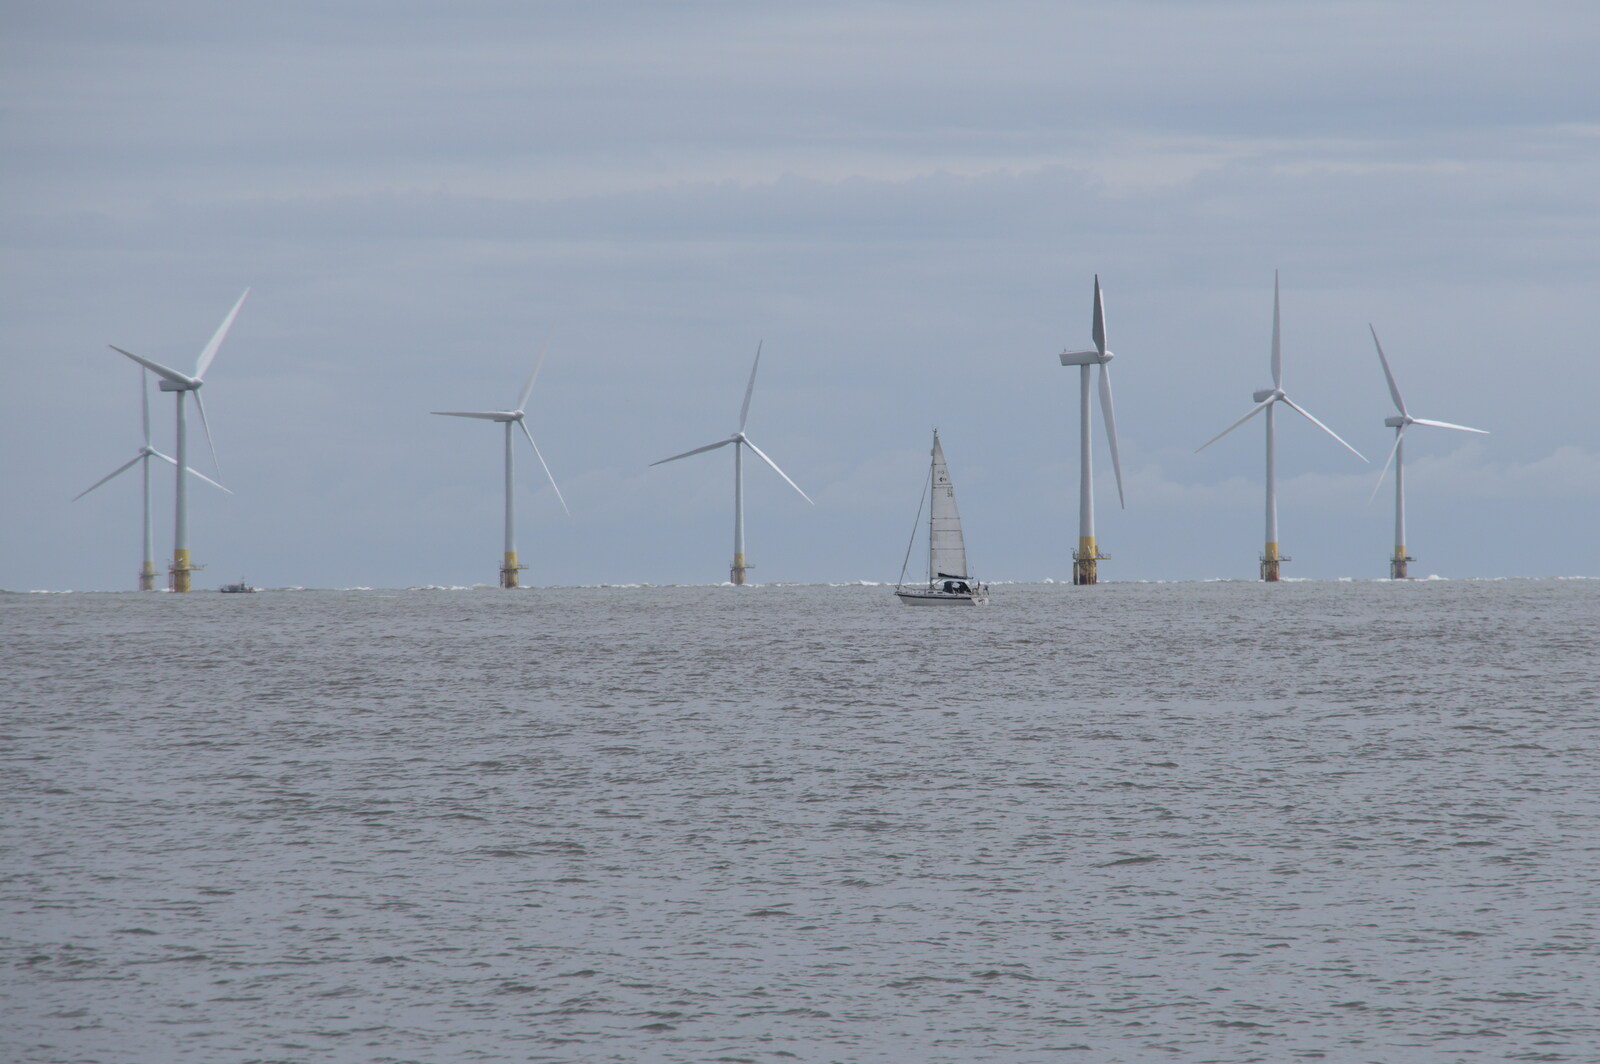 A boat sails past Scroby windfarm from Faded Seaside Glamour: A Weekend in Great Yarmouth, Norfolk - 29th May 2022